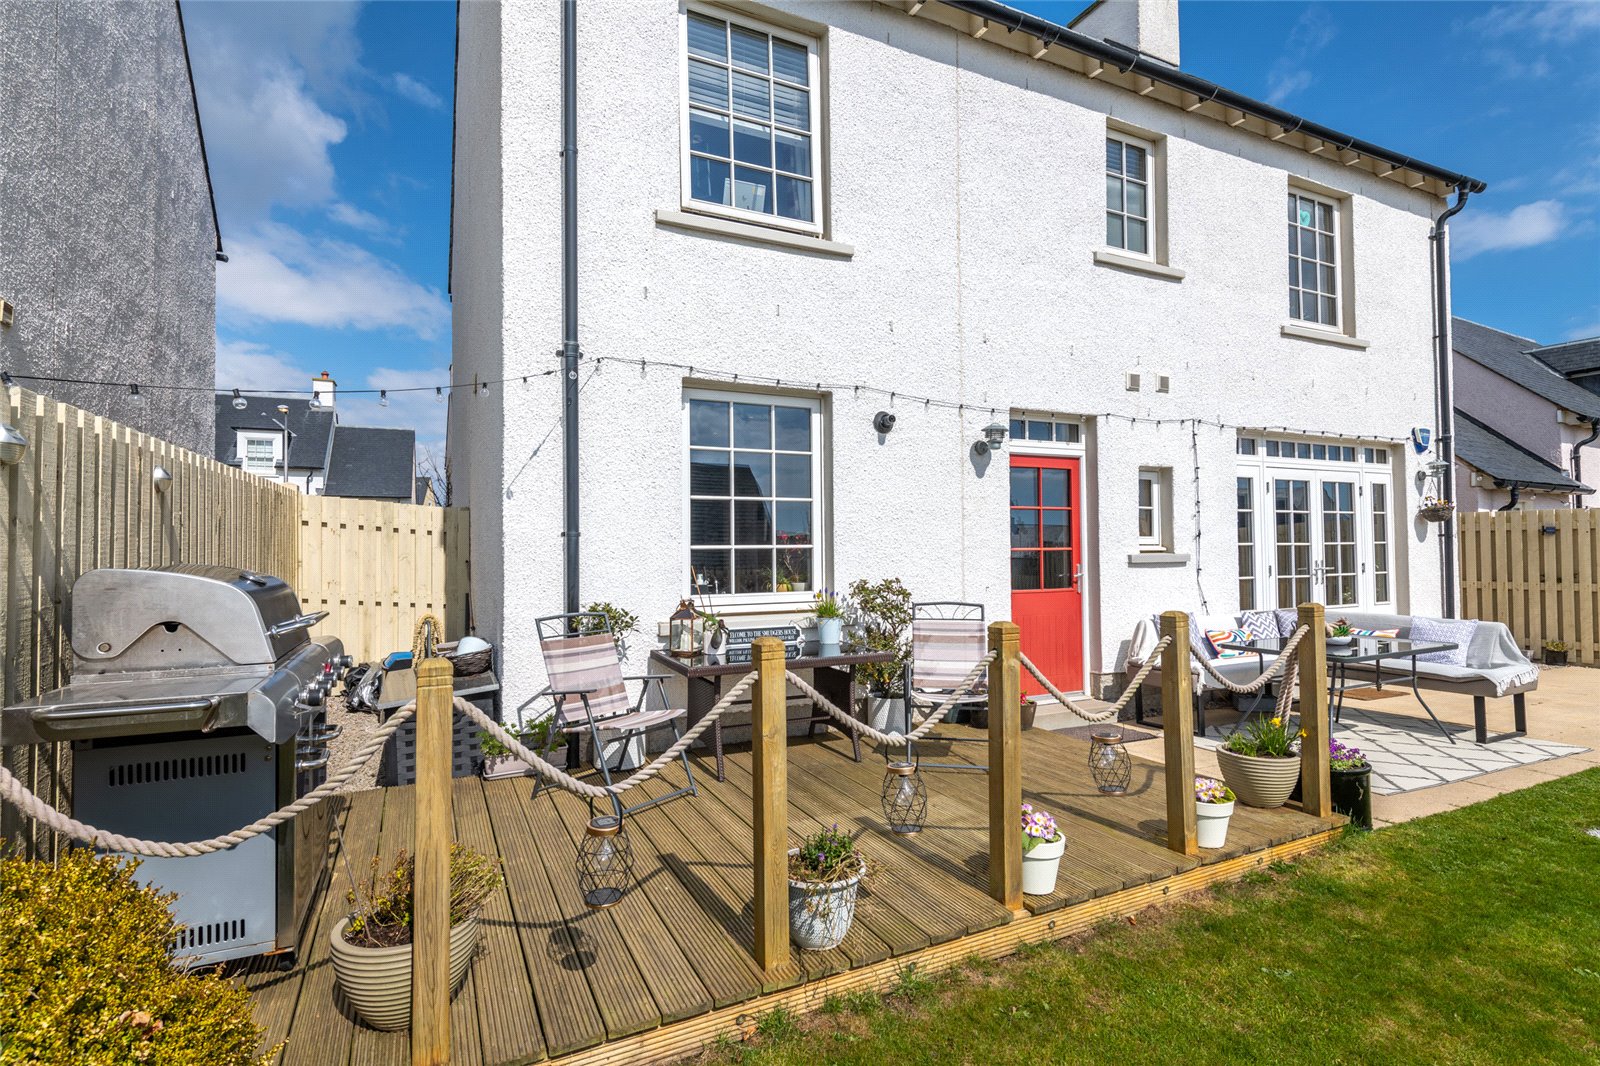 North East Property of the Week (08th July 2022)